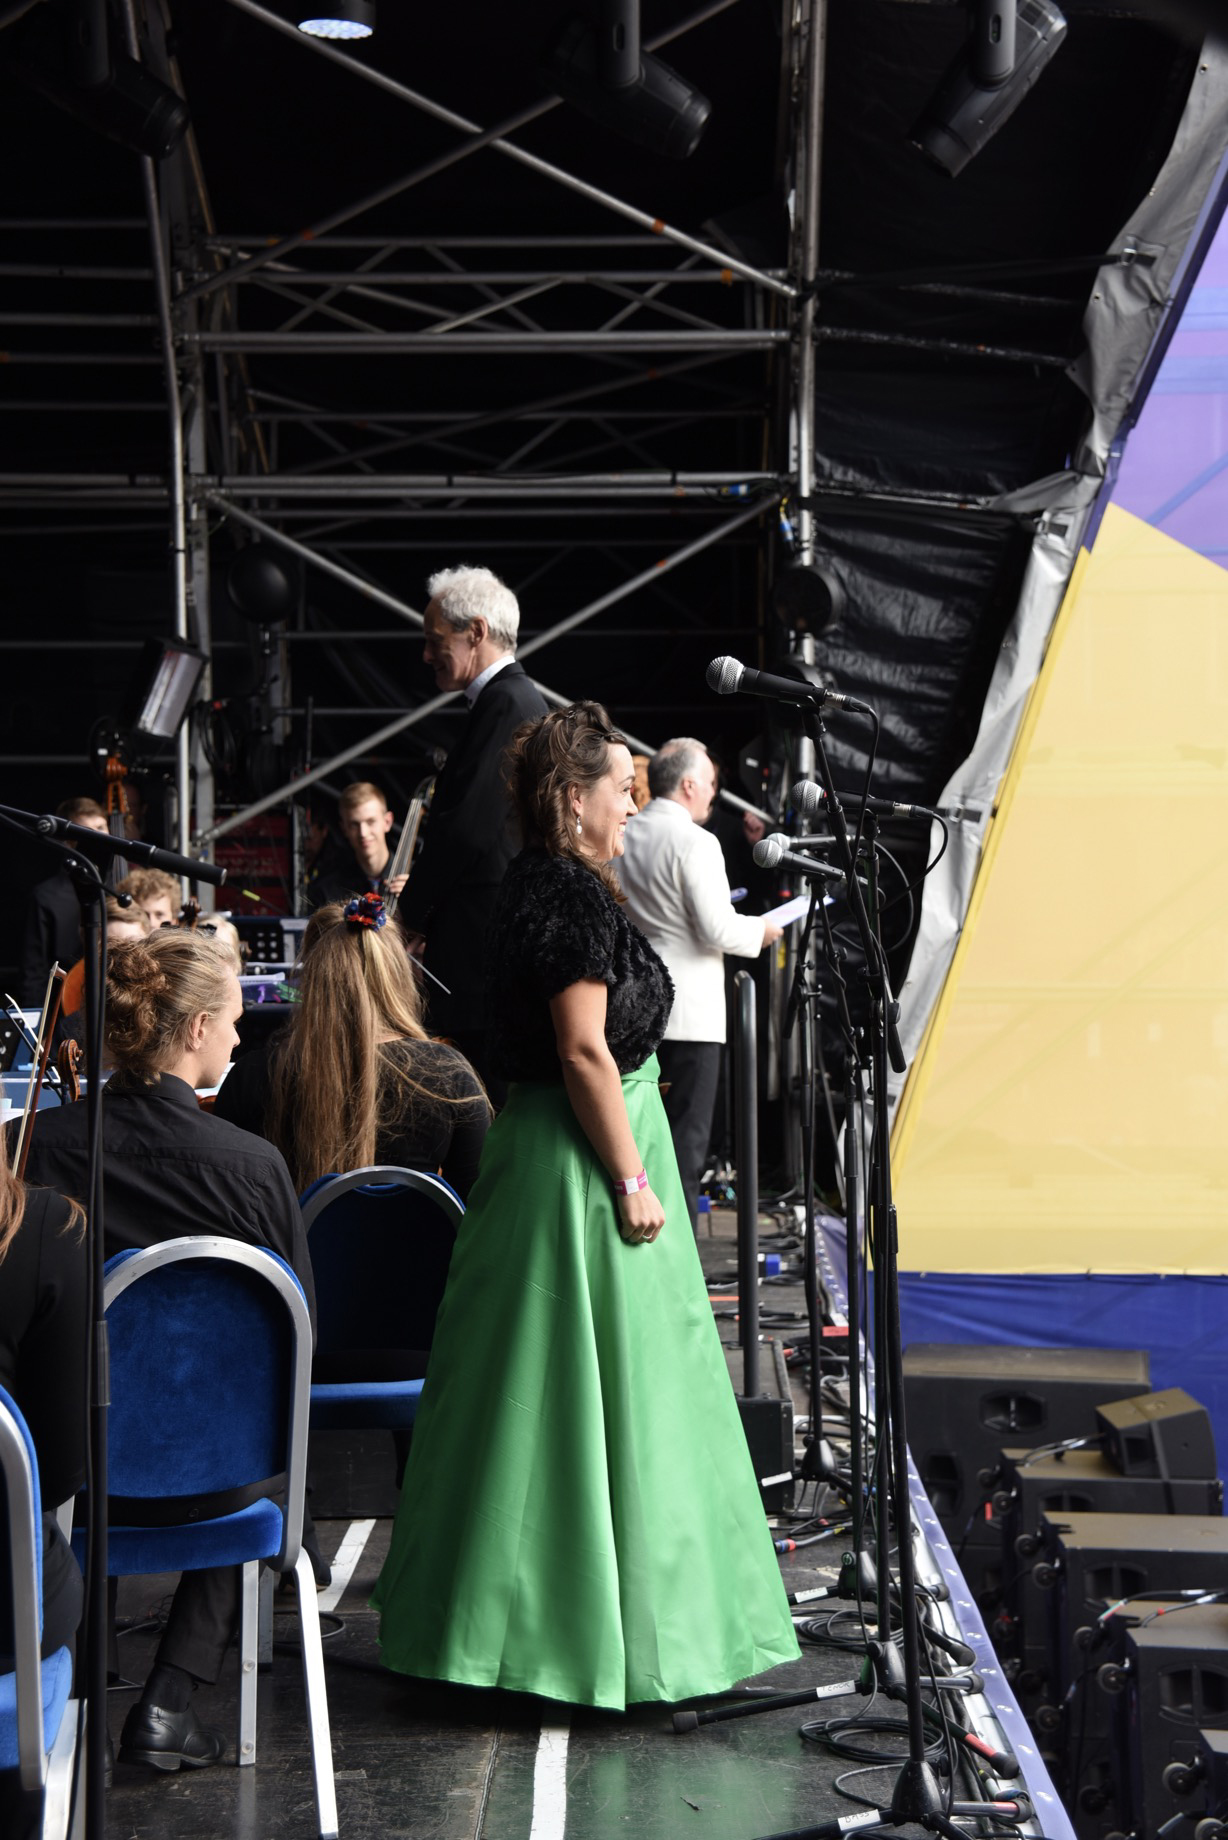 Mezzo-soprano Rebecca Afowny-Jones on stage with the Orchestra in Glasgow\'s George Square. Part of Festival 2018, Glasgow\'s cultural celebrations that ran alongside the European Championship Games, August 2018.